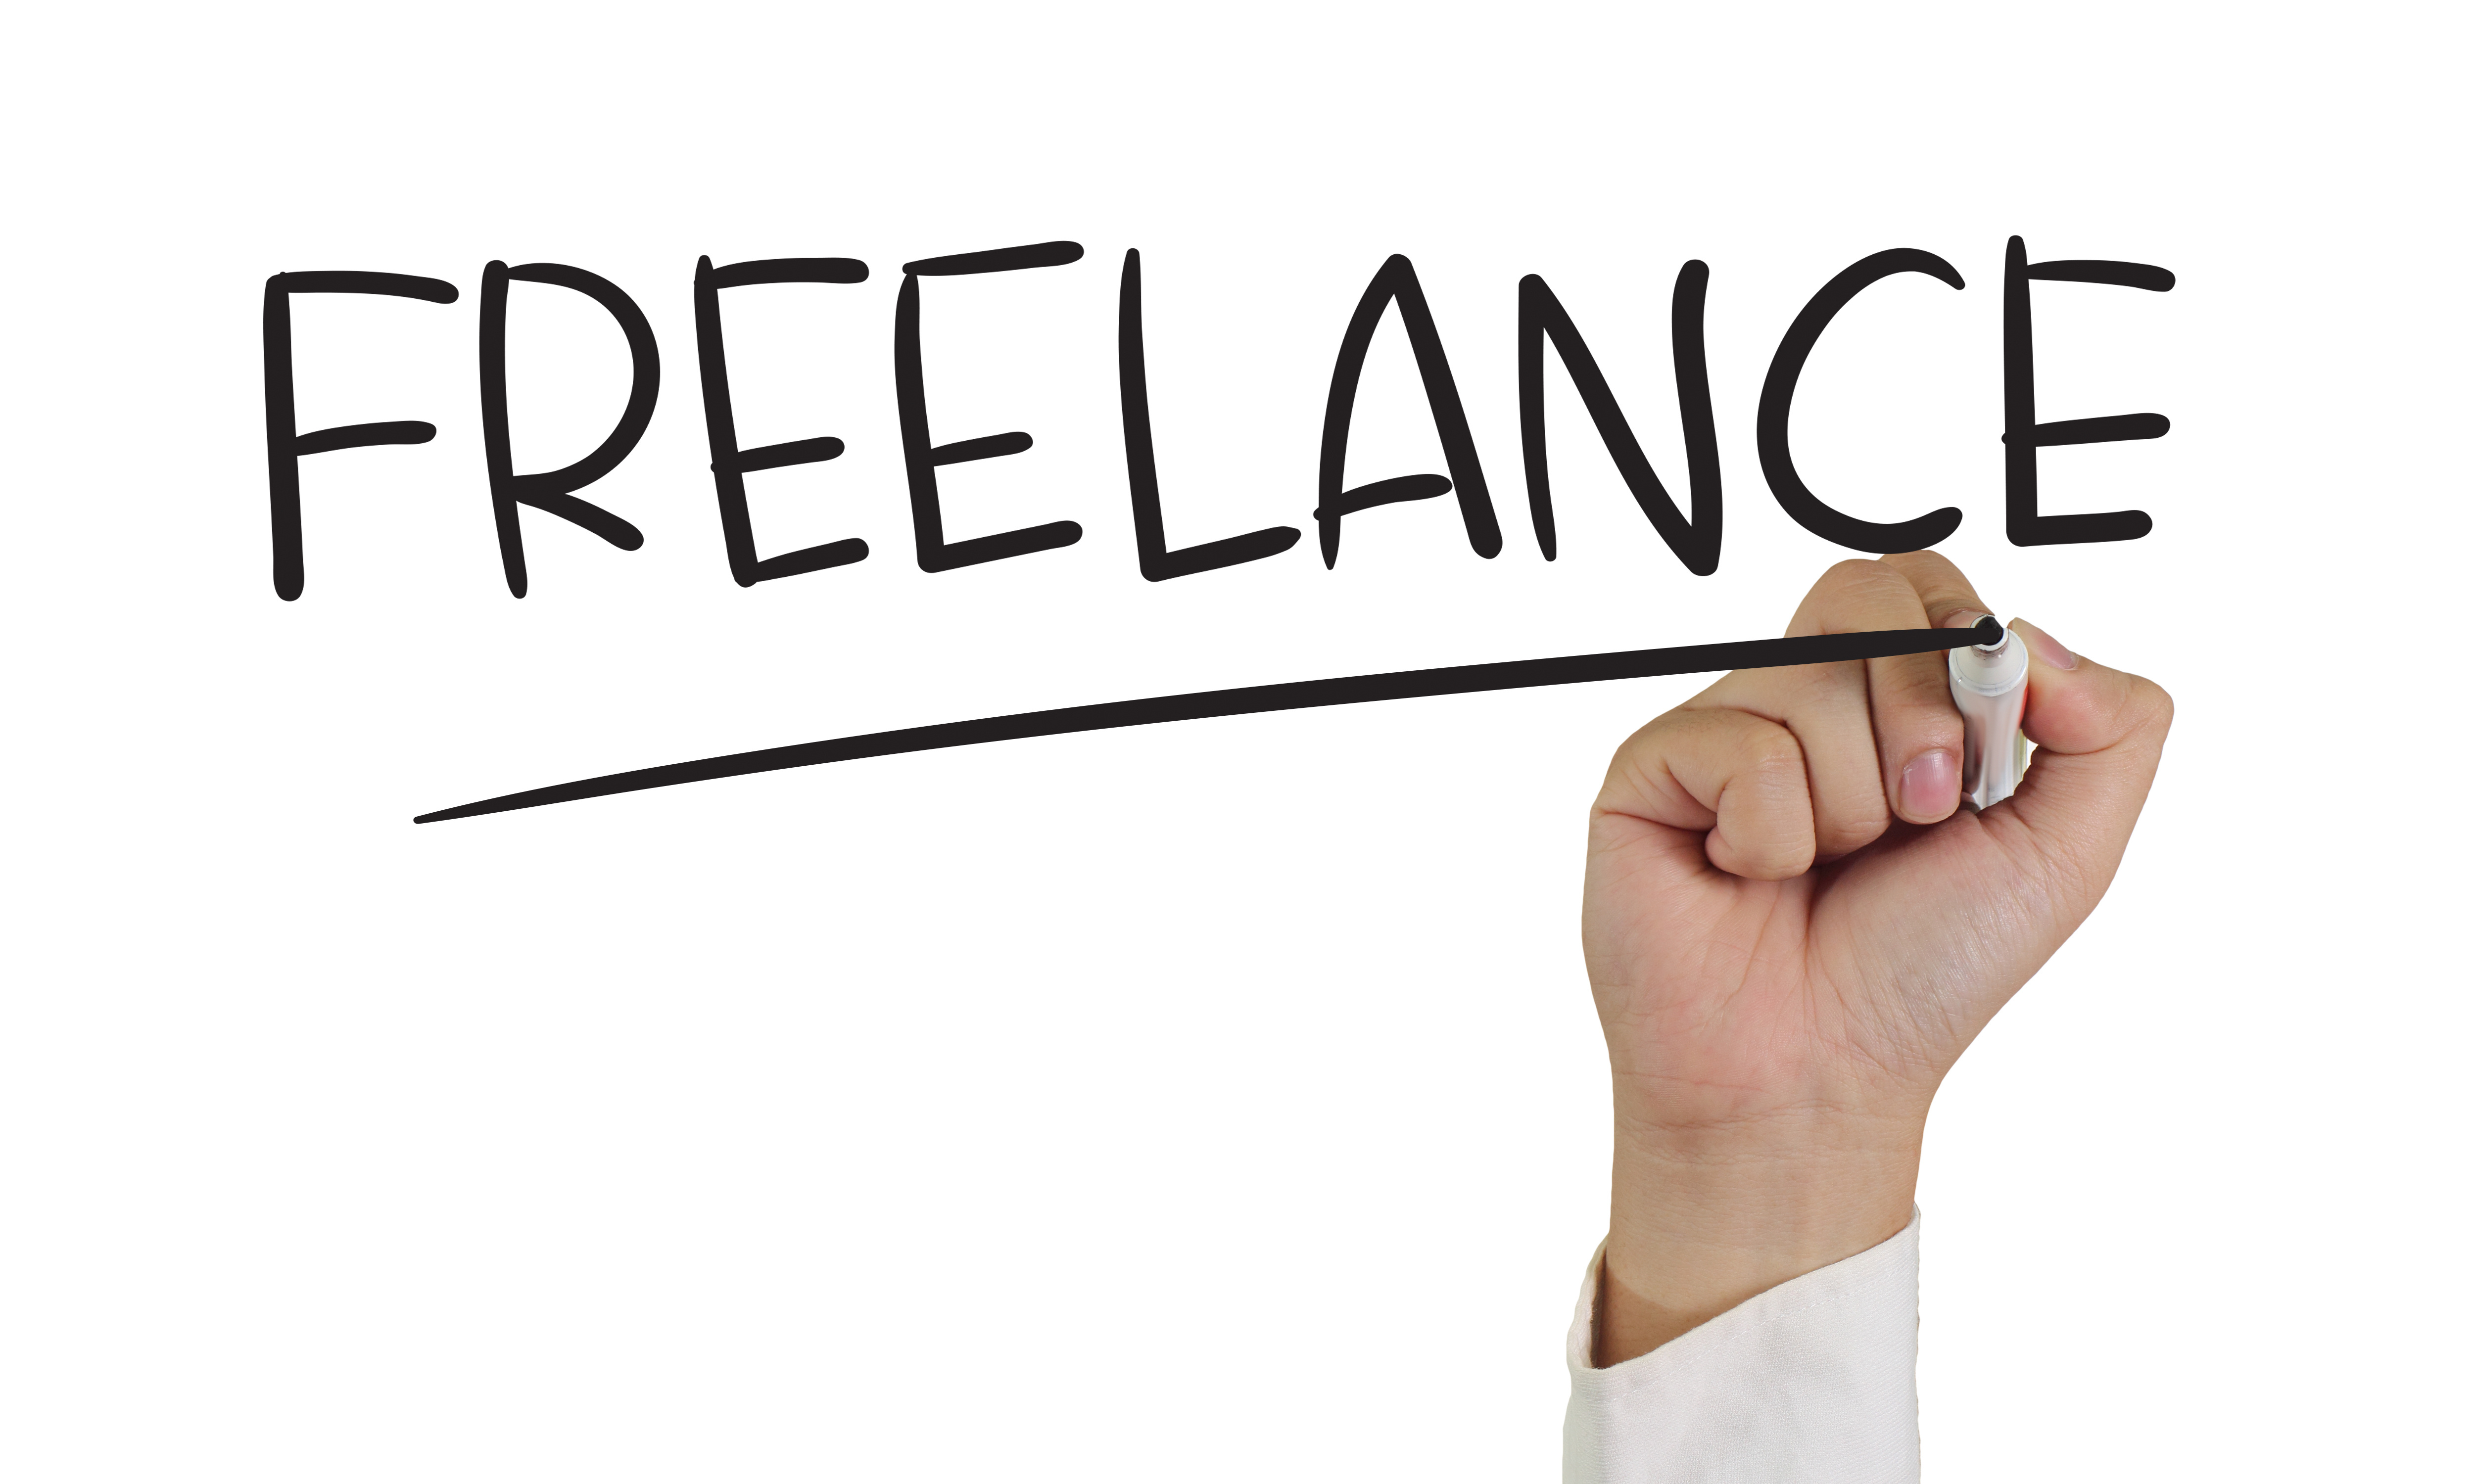 You can hire freelancer as expert